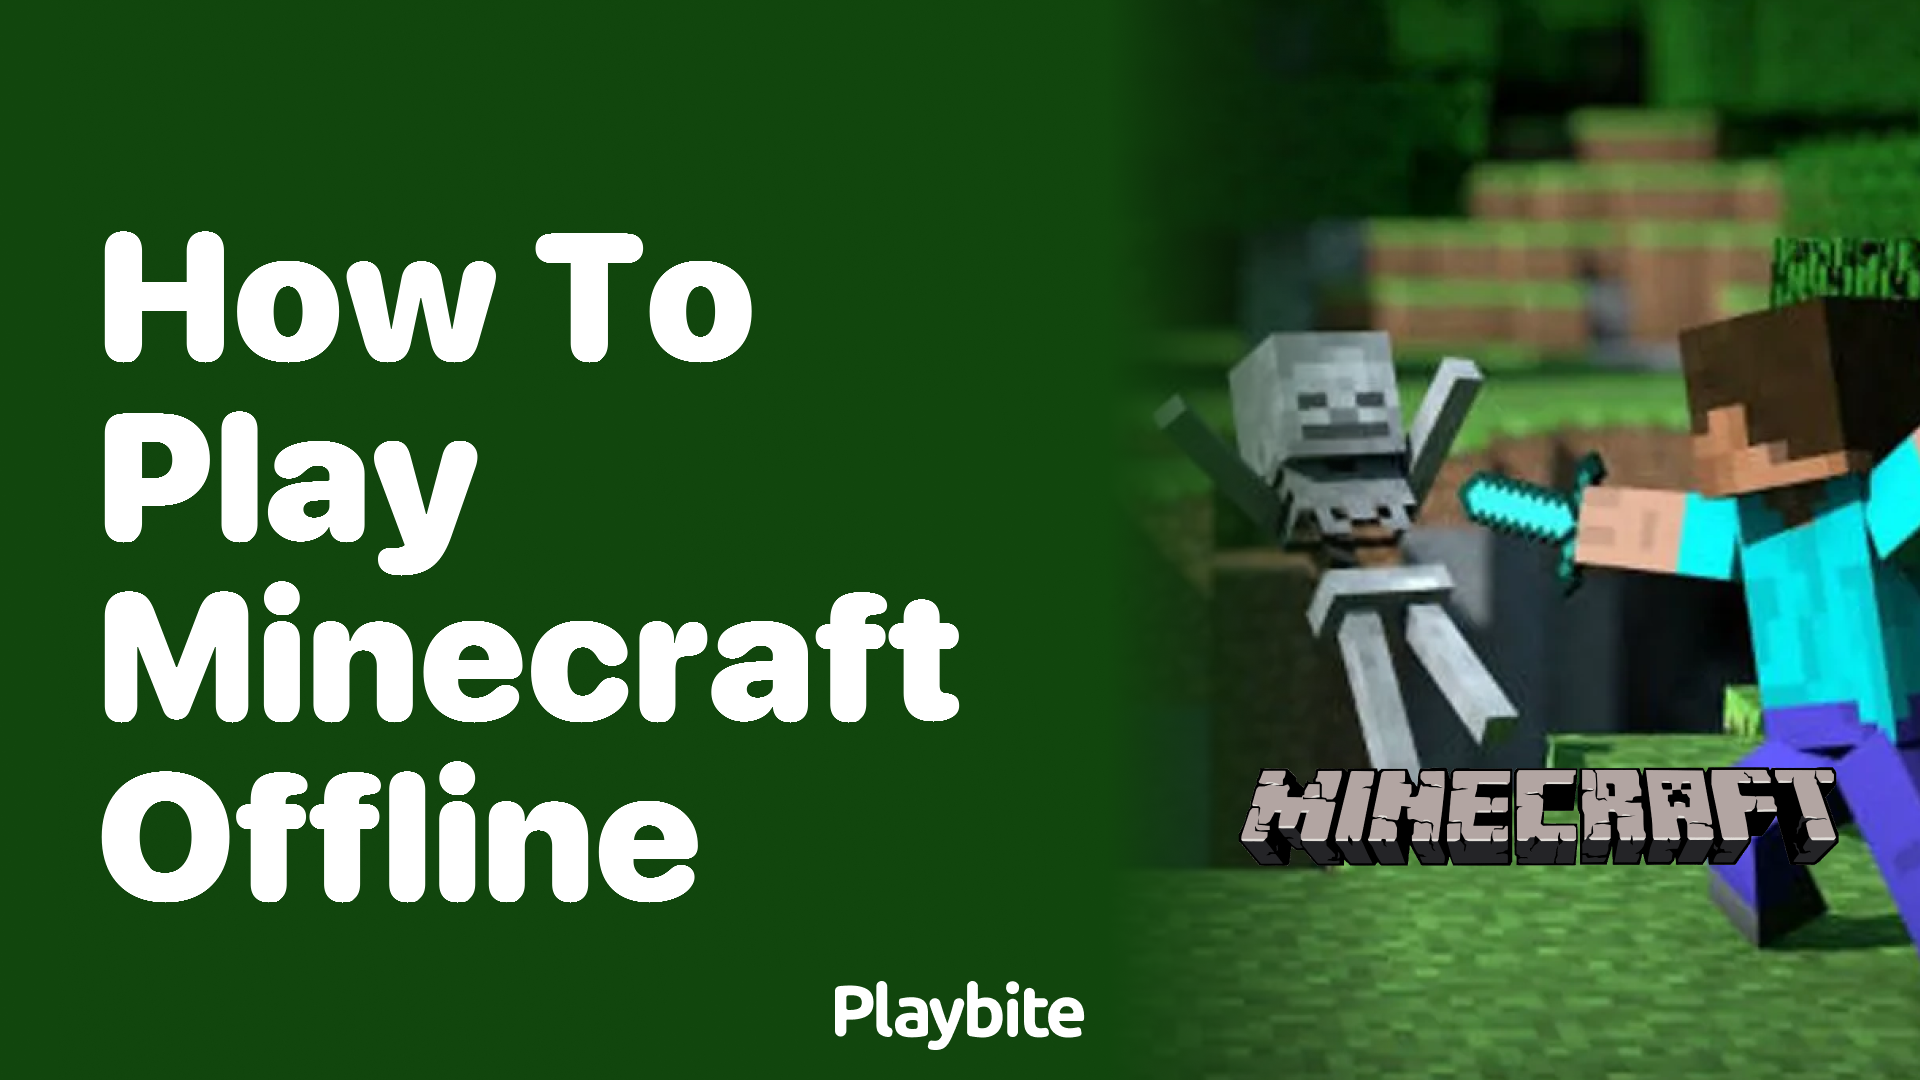 How to Play Minecraft Offline: A Handy Guide